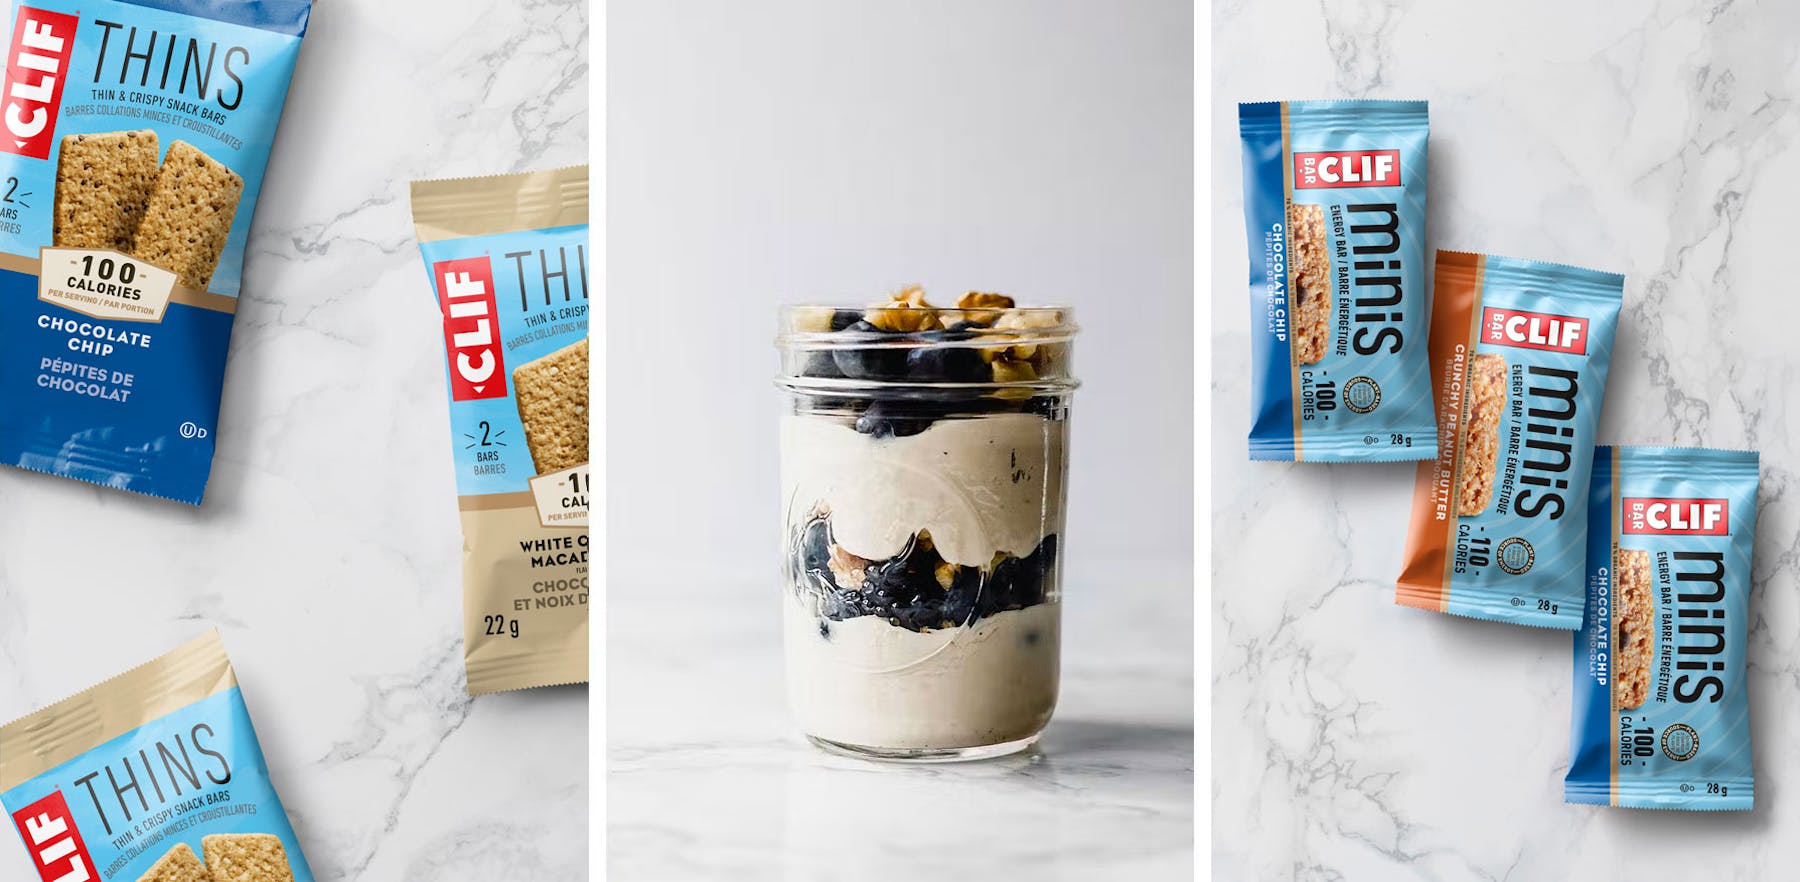 CLIF Thins, yogurt and berries, and CLIF BAR Minis - Canada